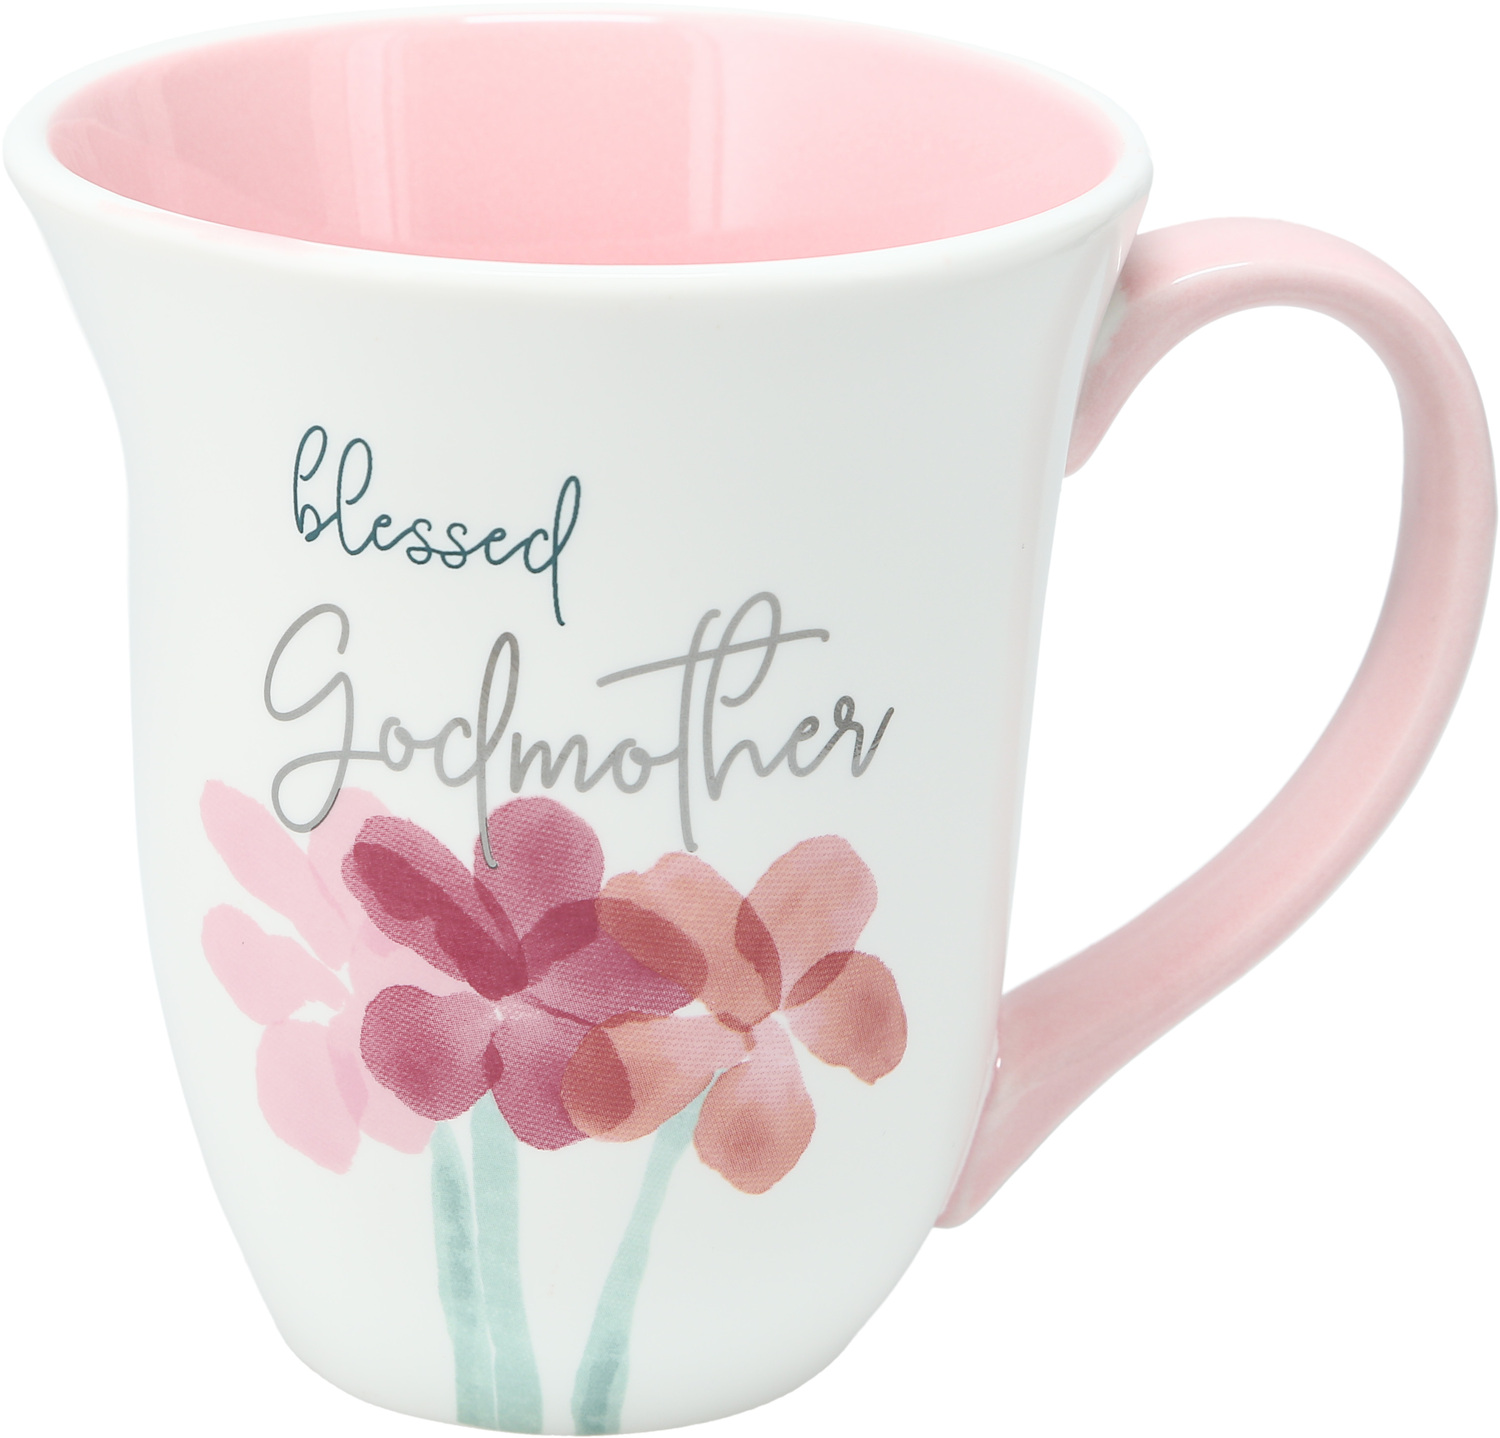 Godmother by Rosy Heart - Godmother - 16 oz Cup